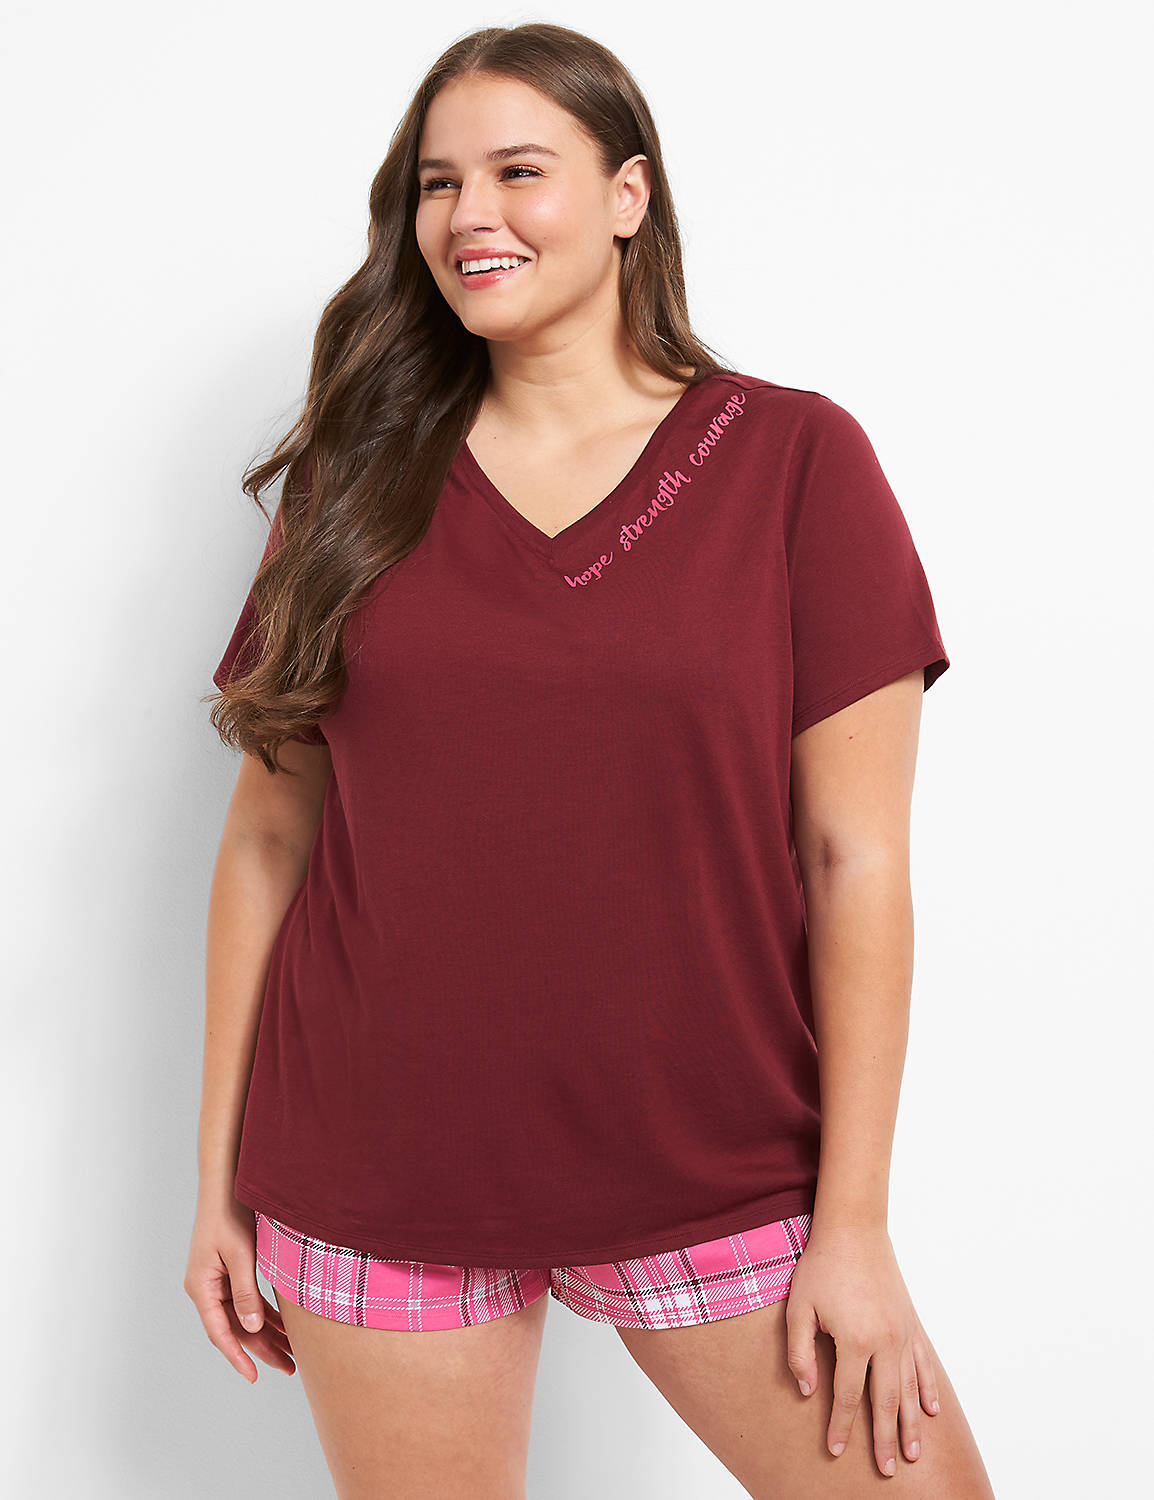 V Neck Tee and Short PJ Set 1112873 Product Image 1